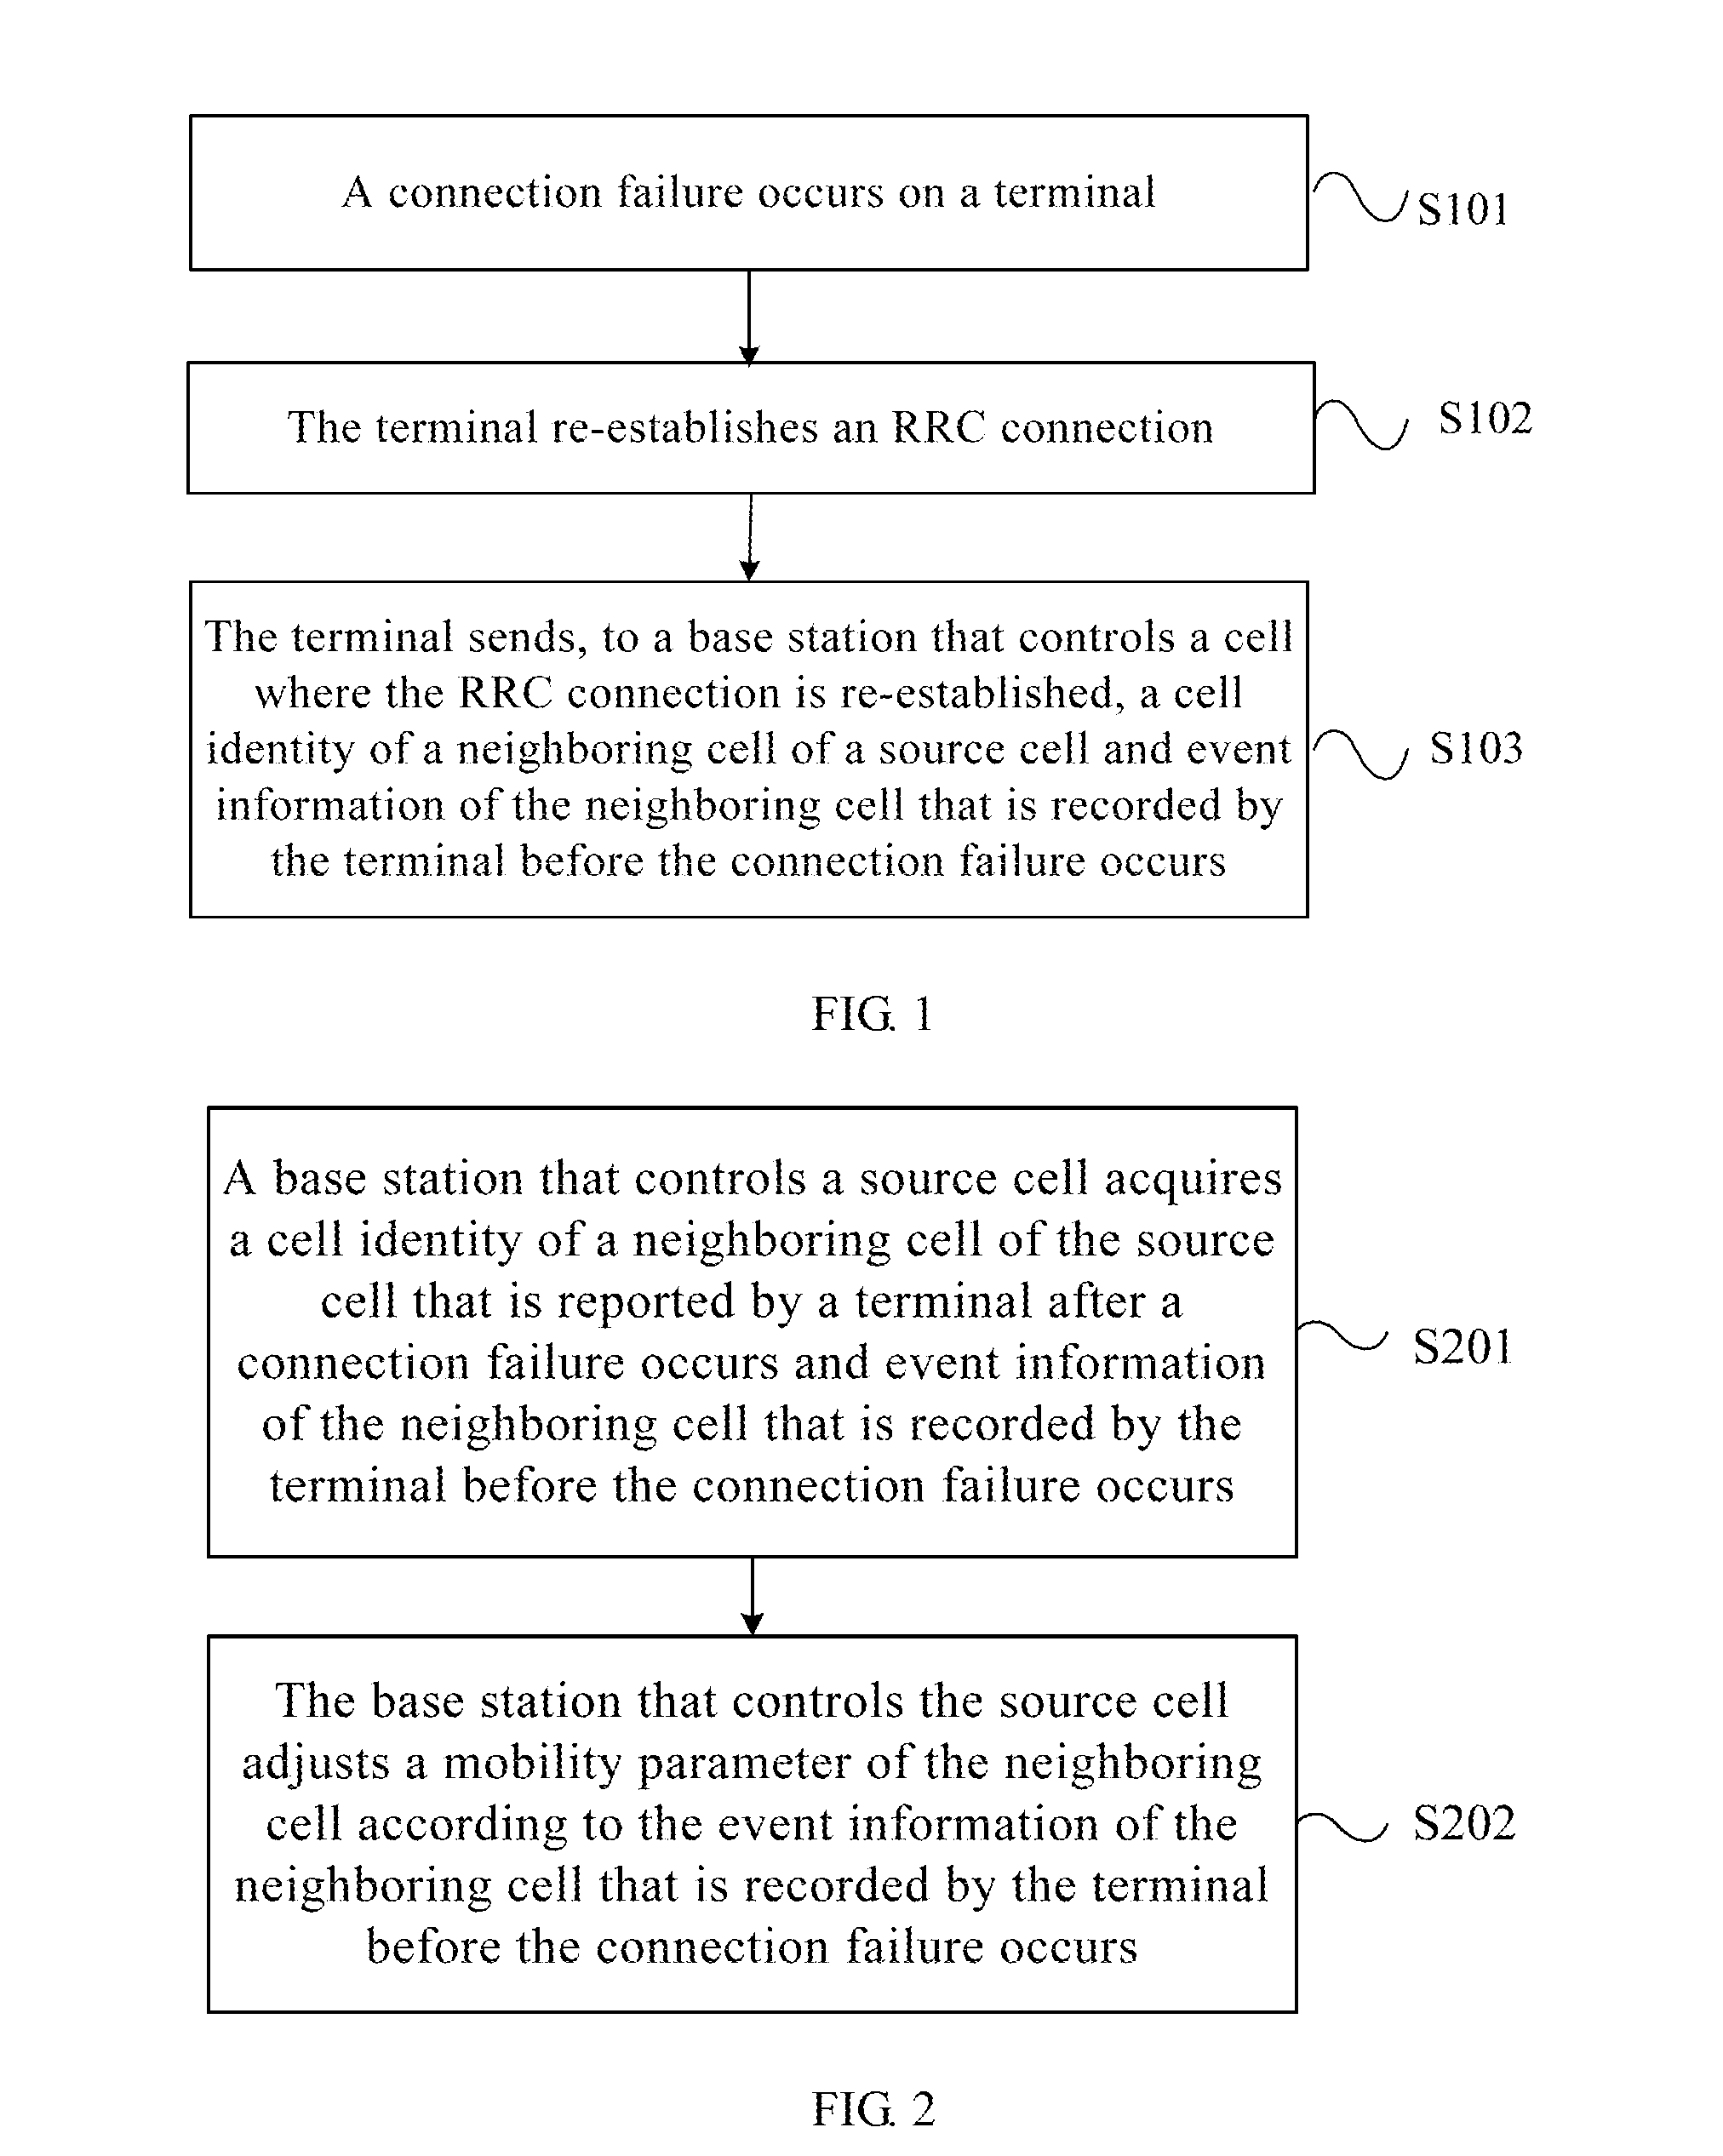 Method and Device for Reporting Cell Information and Adjusting Cell Mobility Parameter